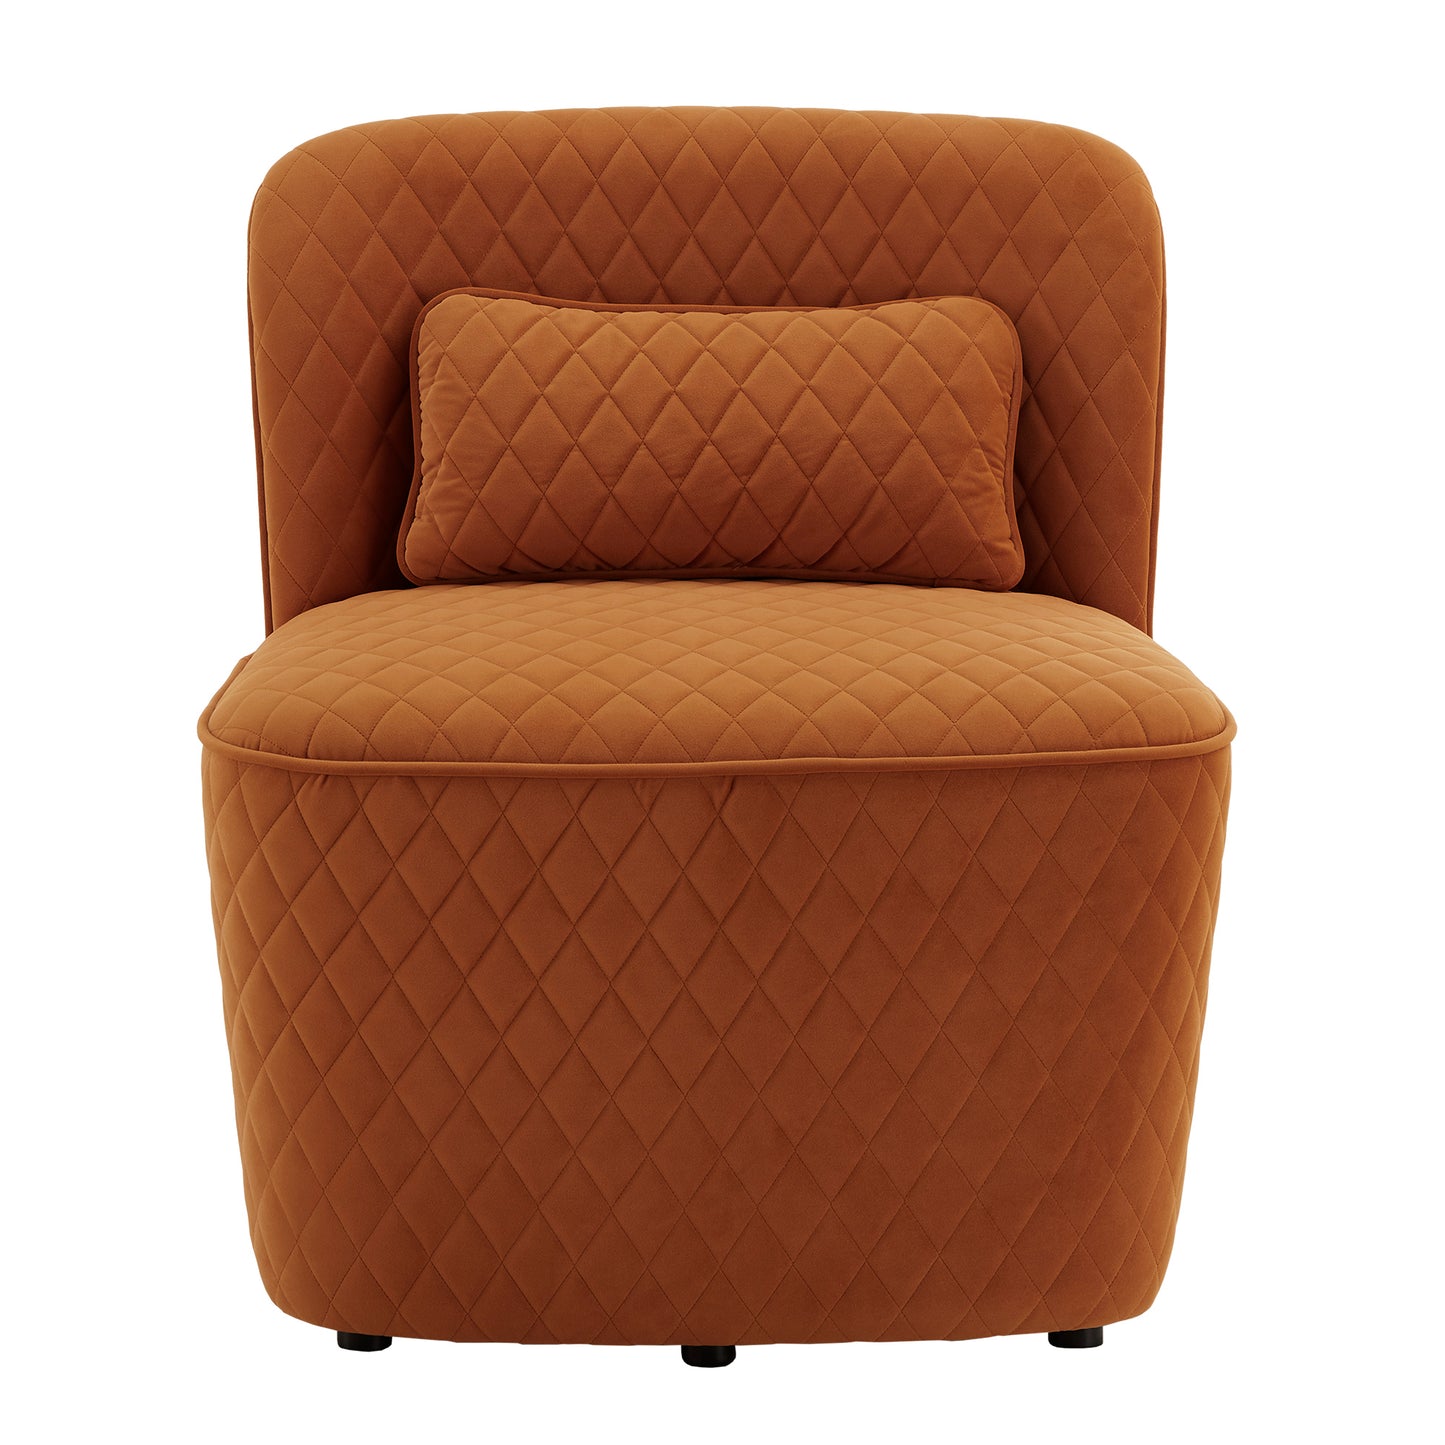 Orange Fabric Chair and Ottoman - Accent Chair Only